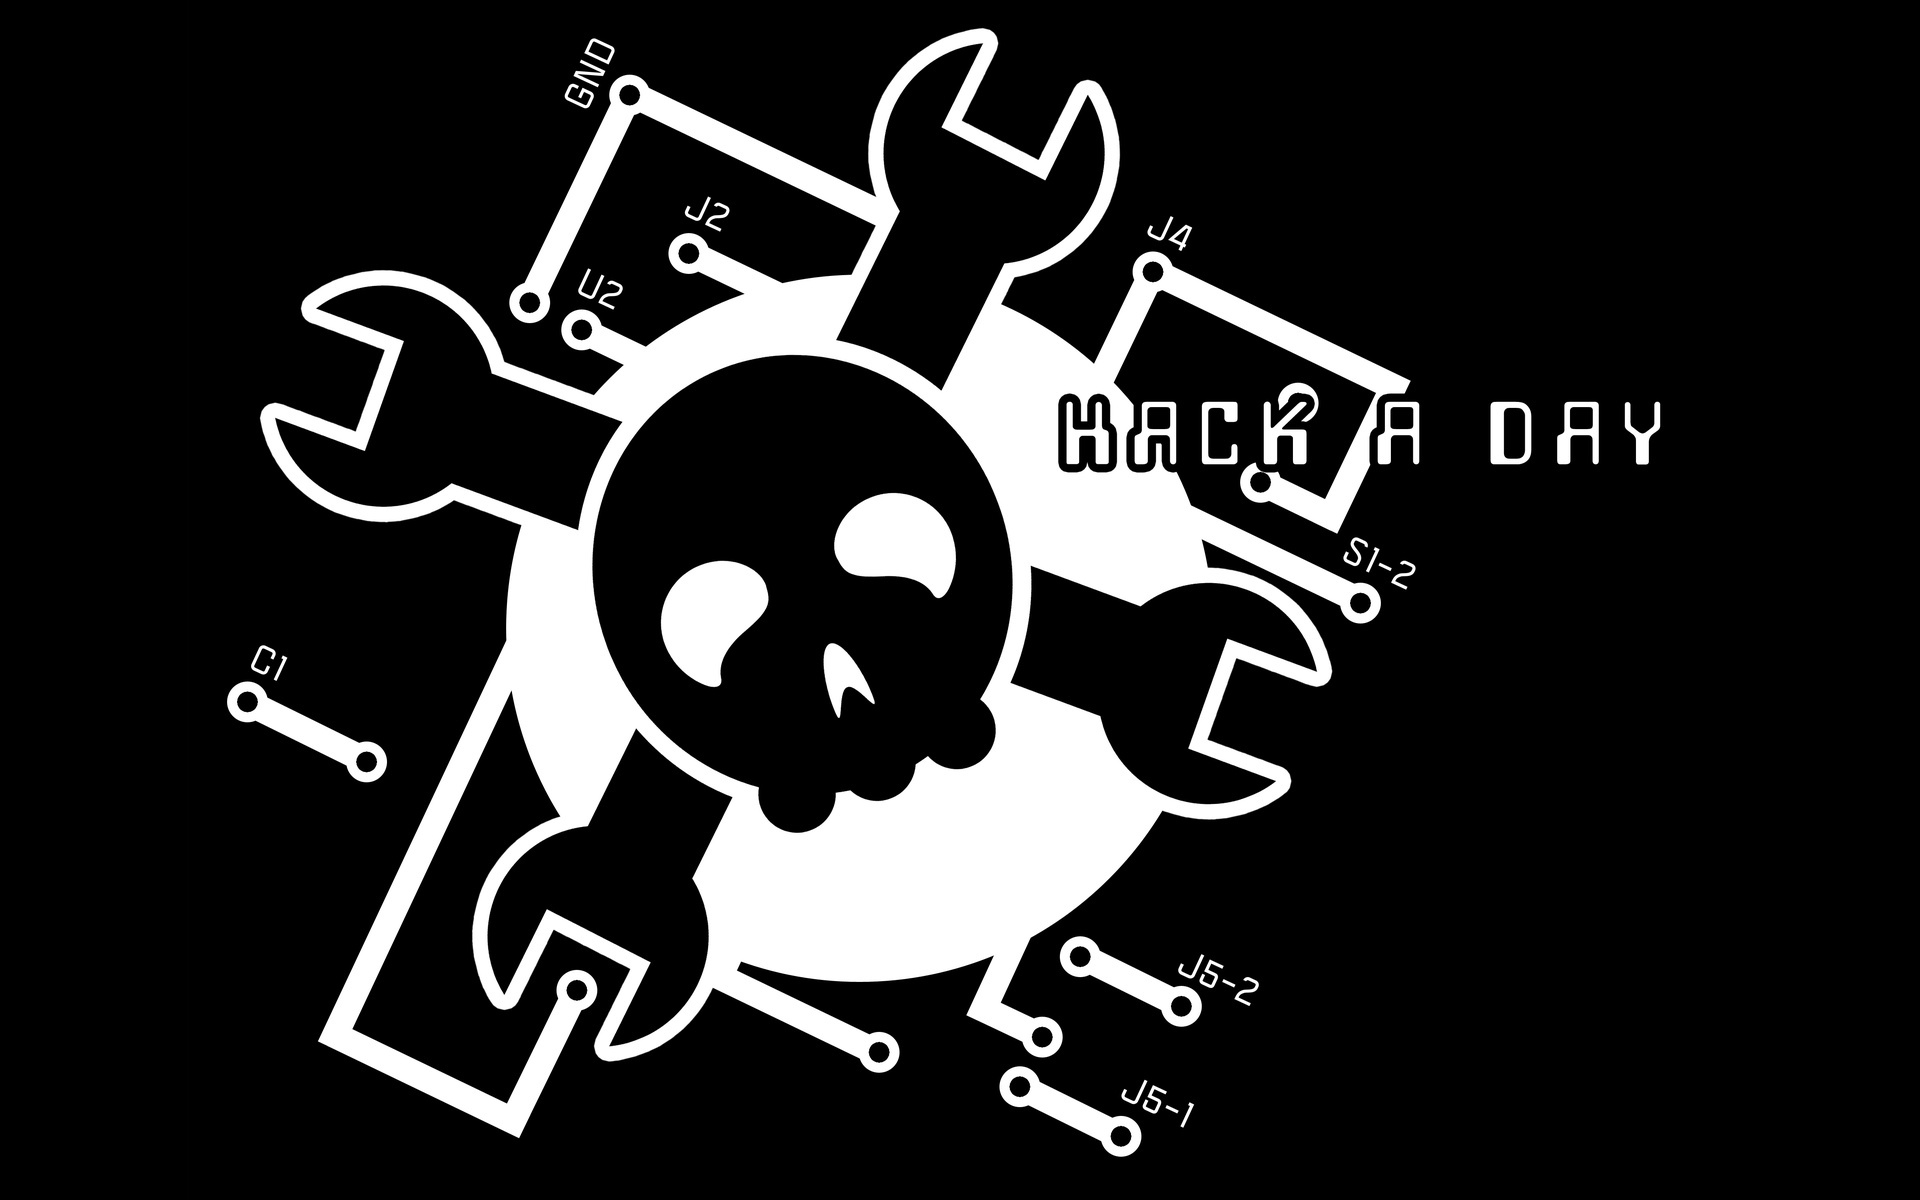 Hack A Day Wallpaper - Hackaday Iphone , HD Wallpaper & Backgrounds